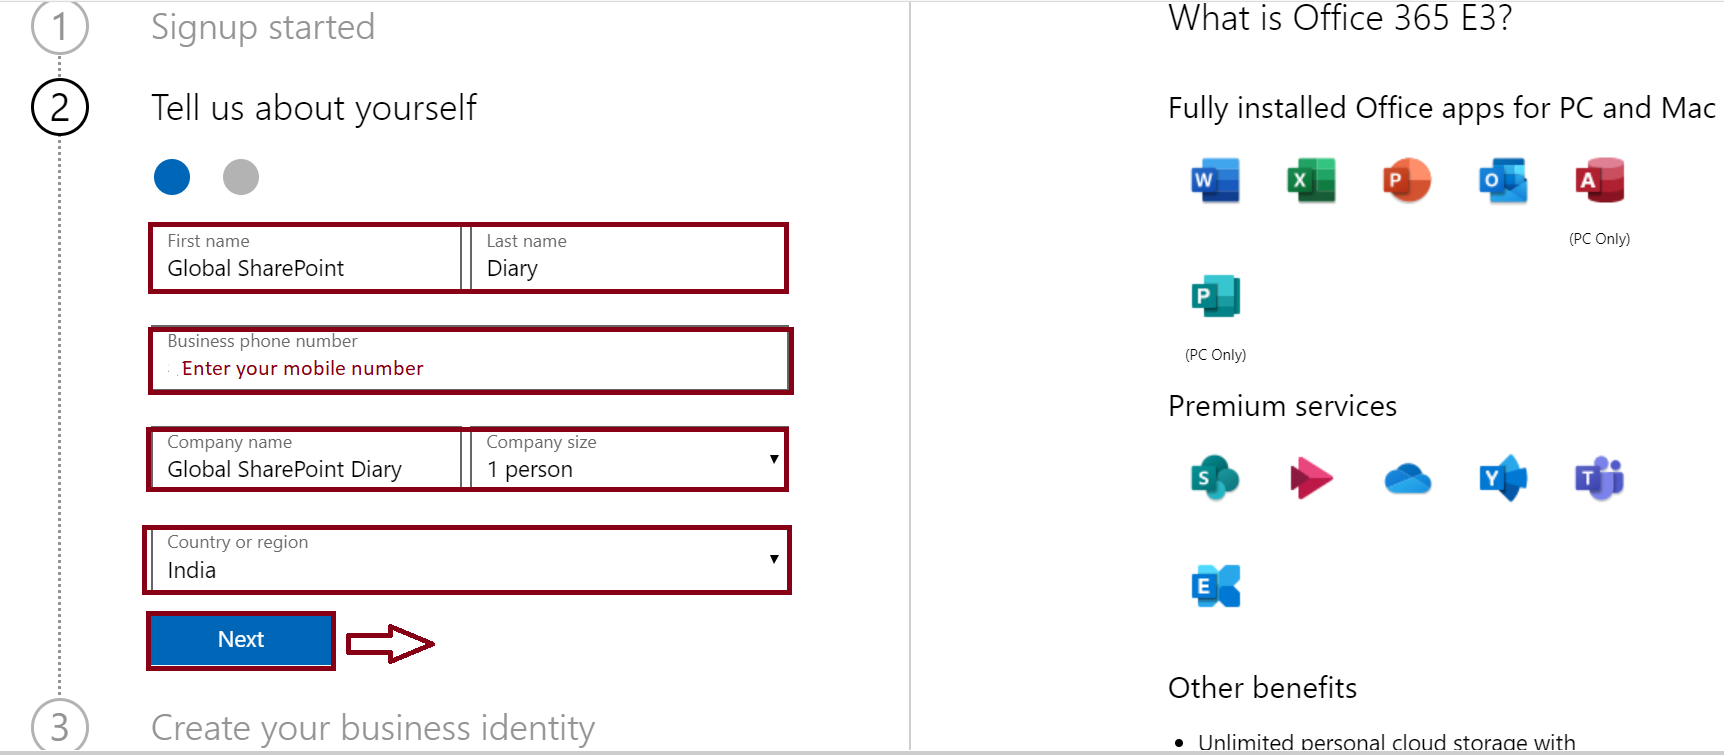 Office 365 E3 Trial - Tell us about yourself